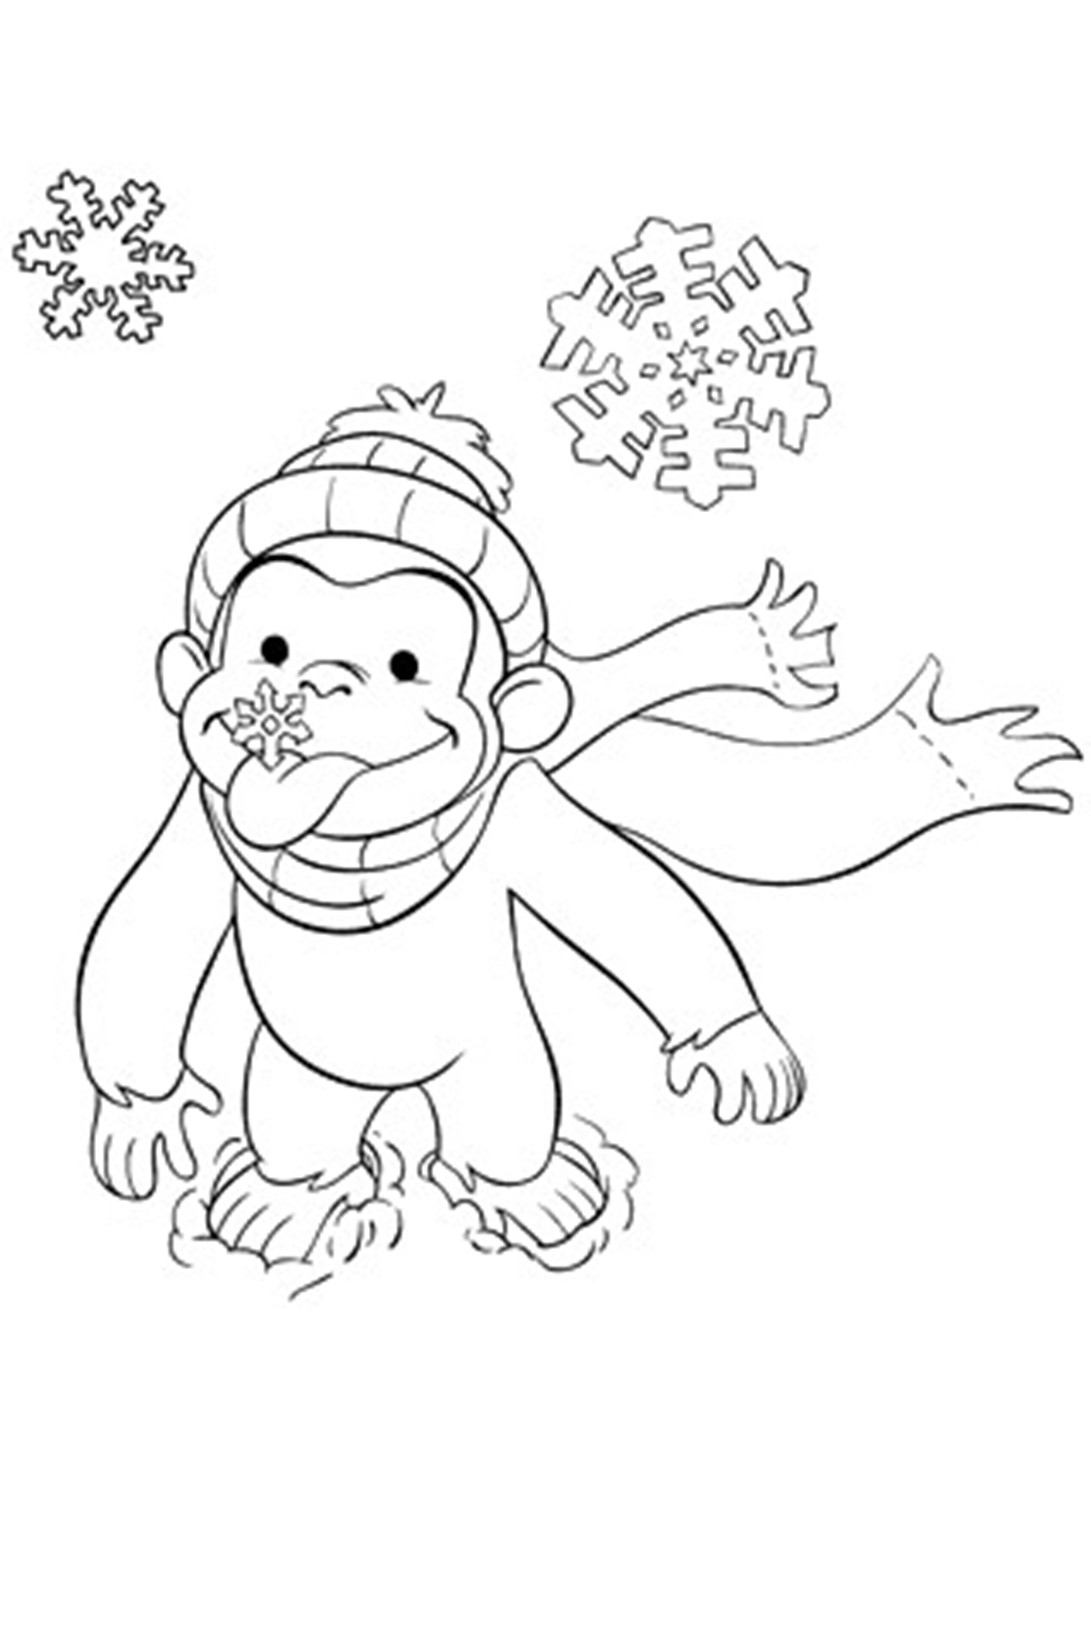 Snow Monkey coloring #14, Download drawings